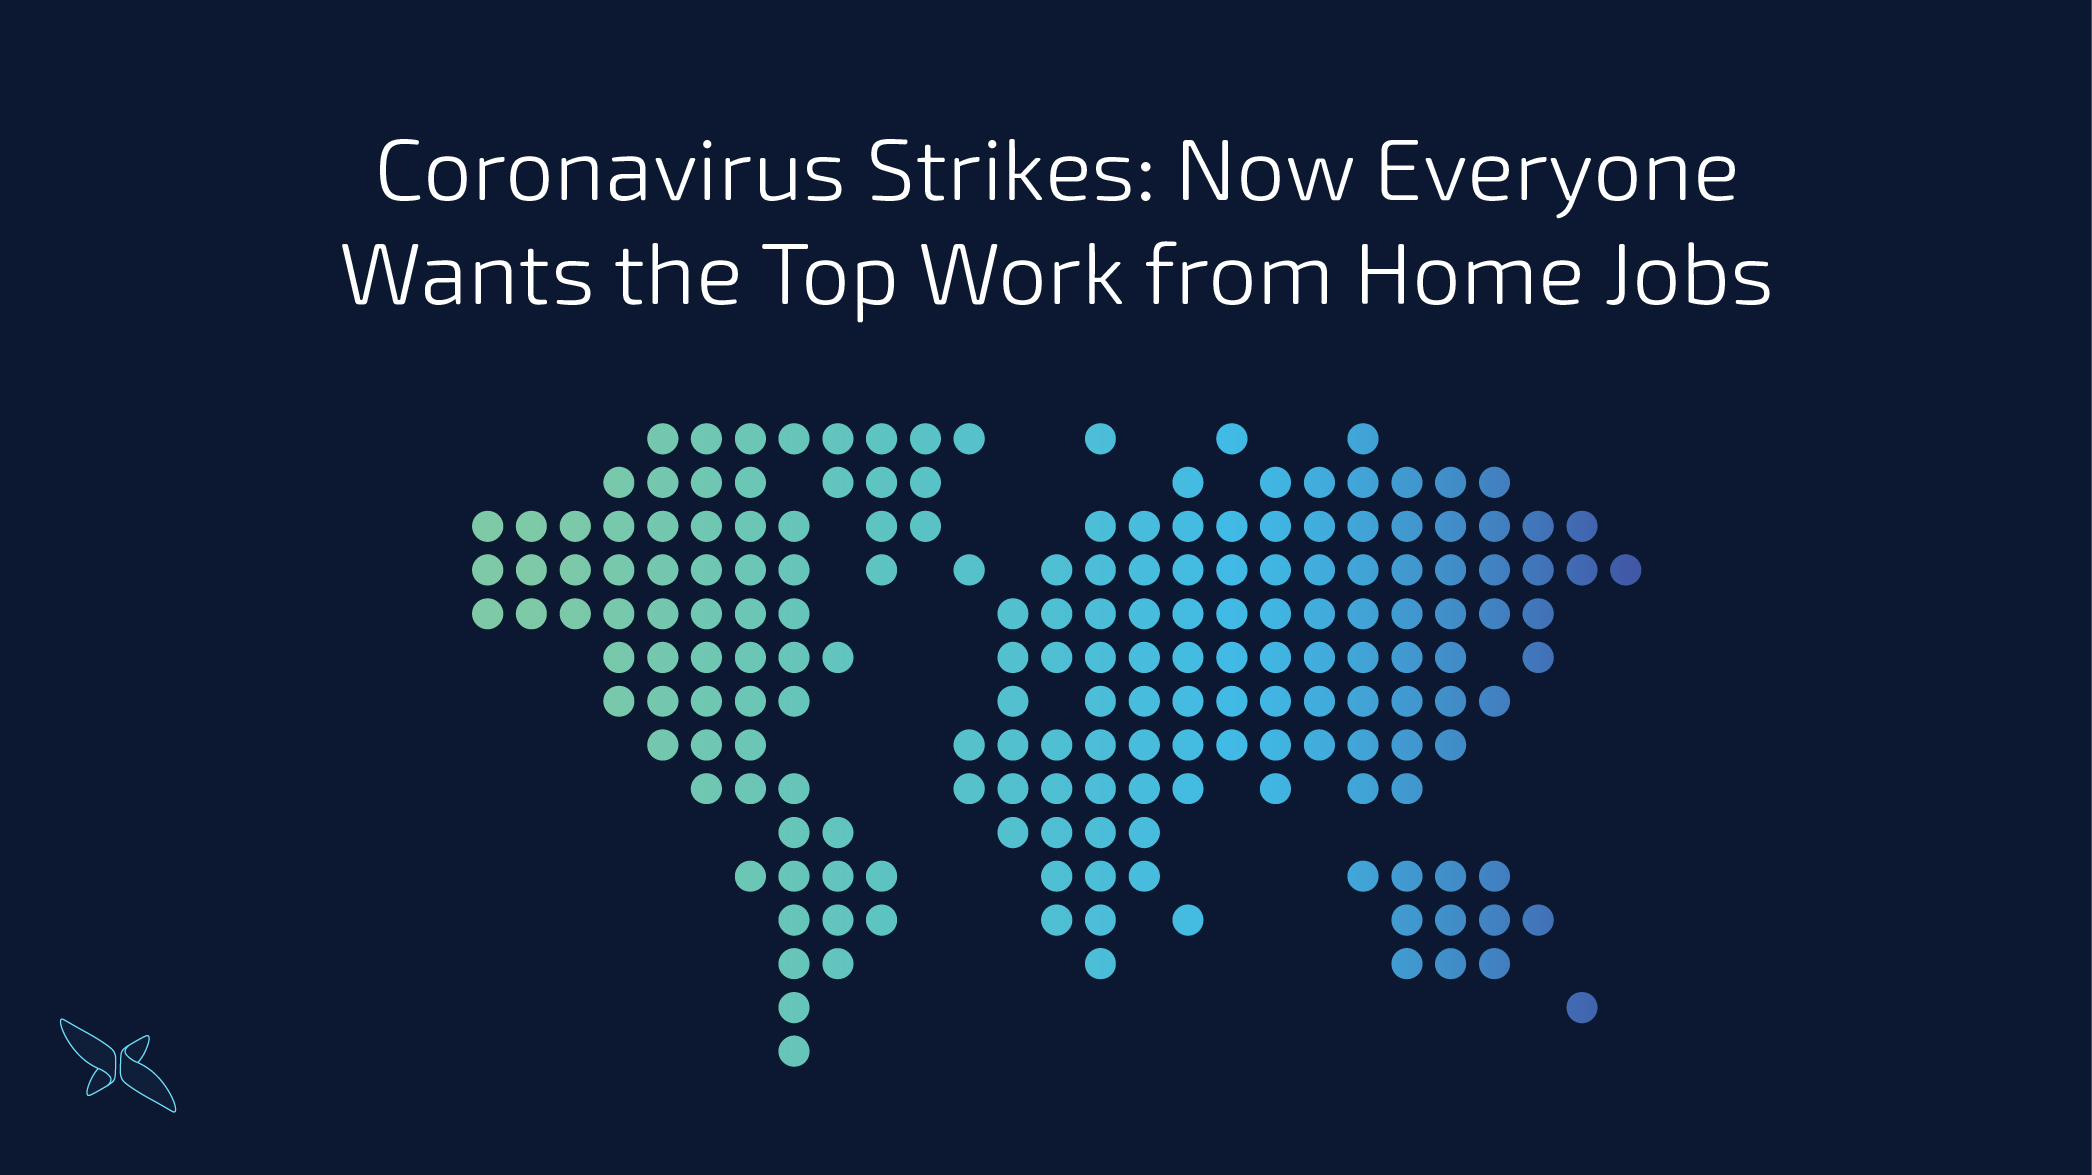 Coronavirus Strikes: Now Everyone Wants the Top Work from Home Jobs